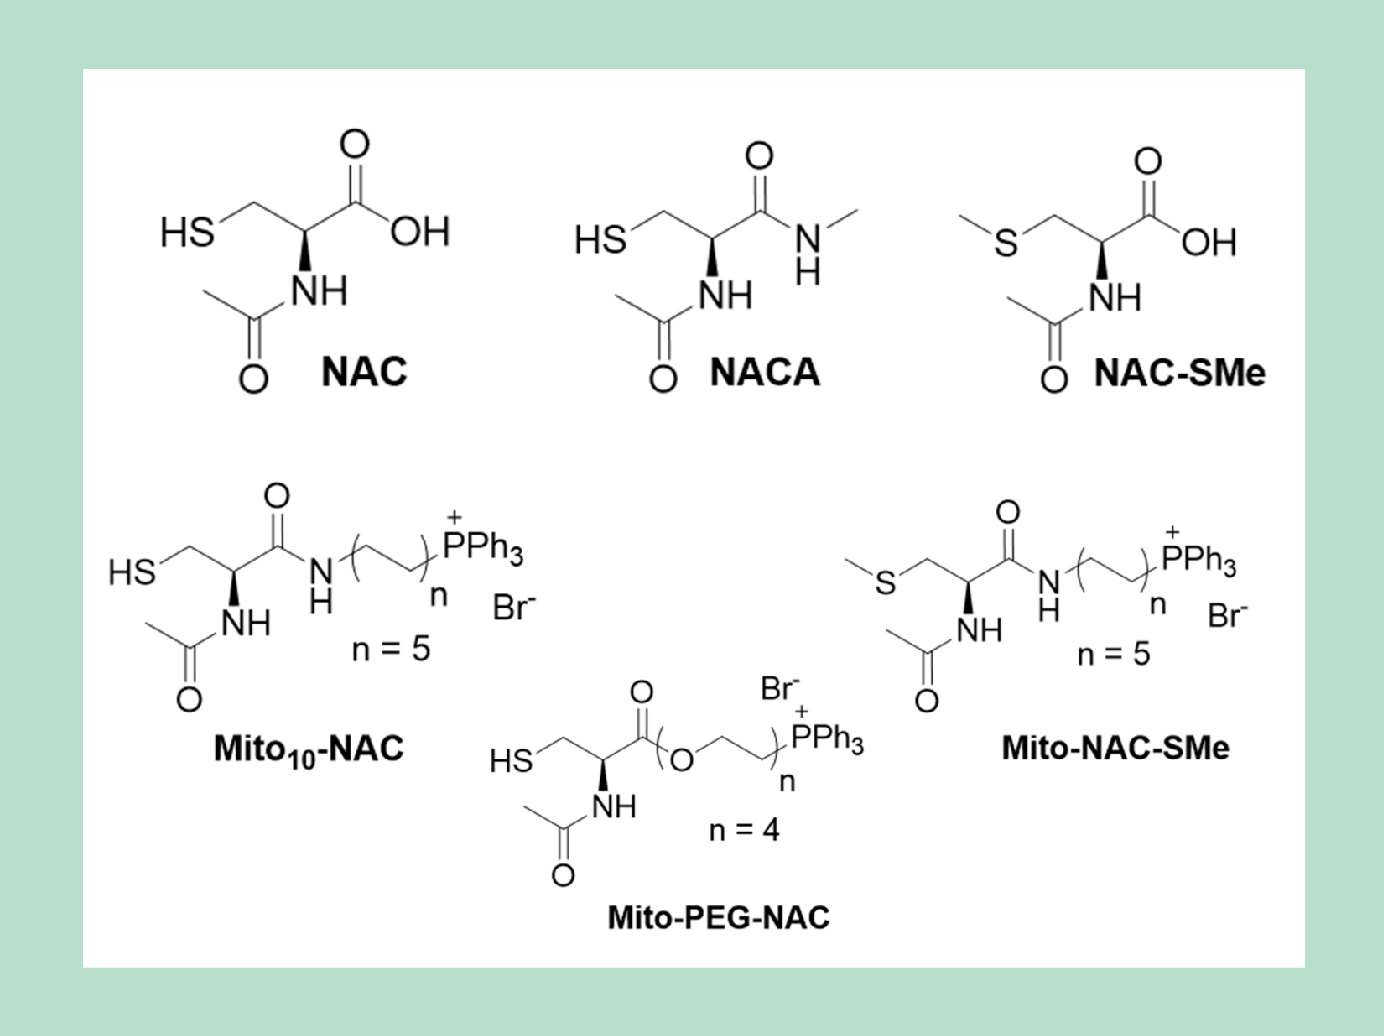 chemical structures of NAC and Mito10-NAC analogs